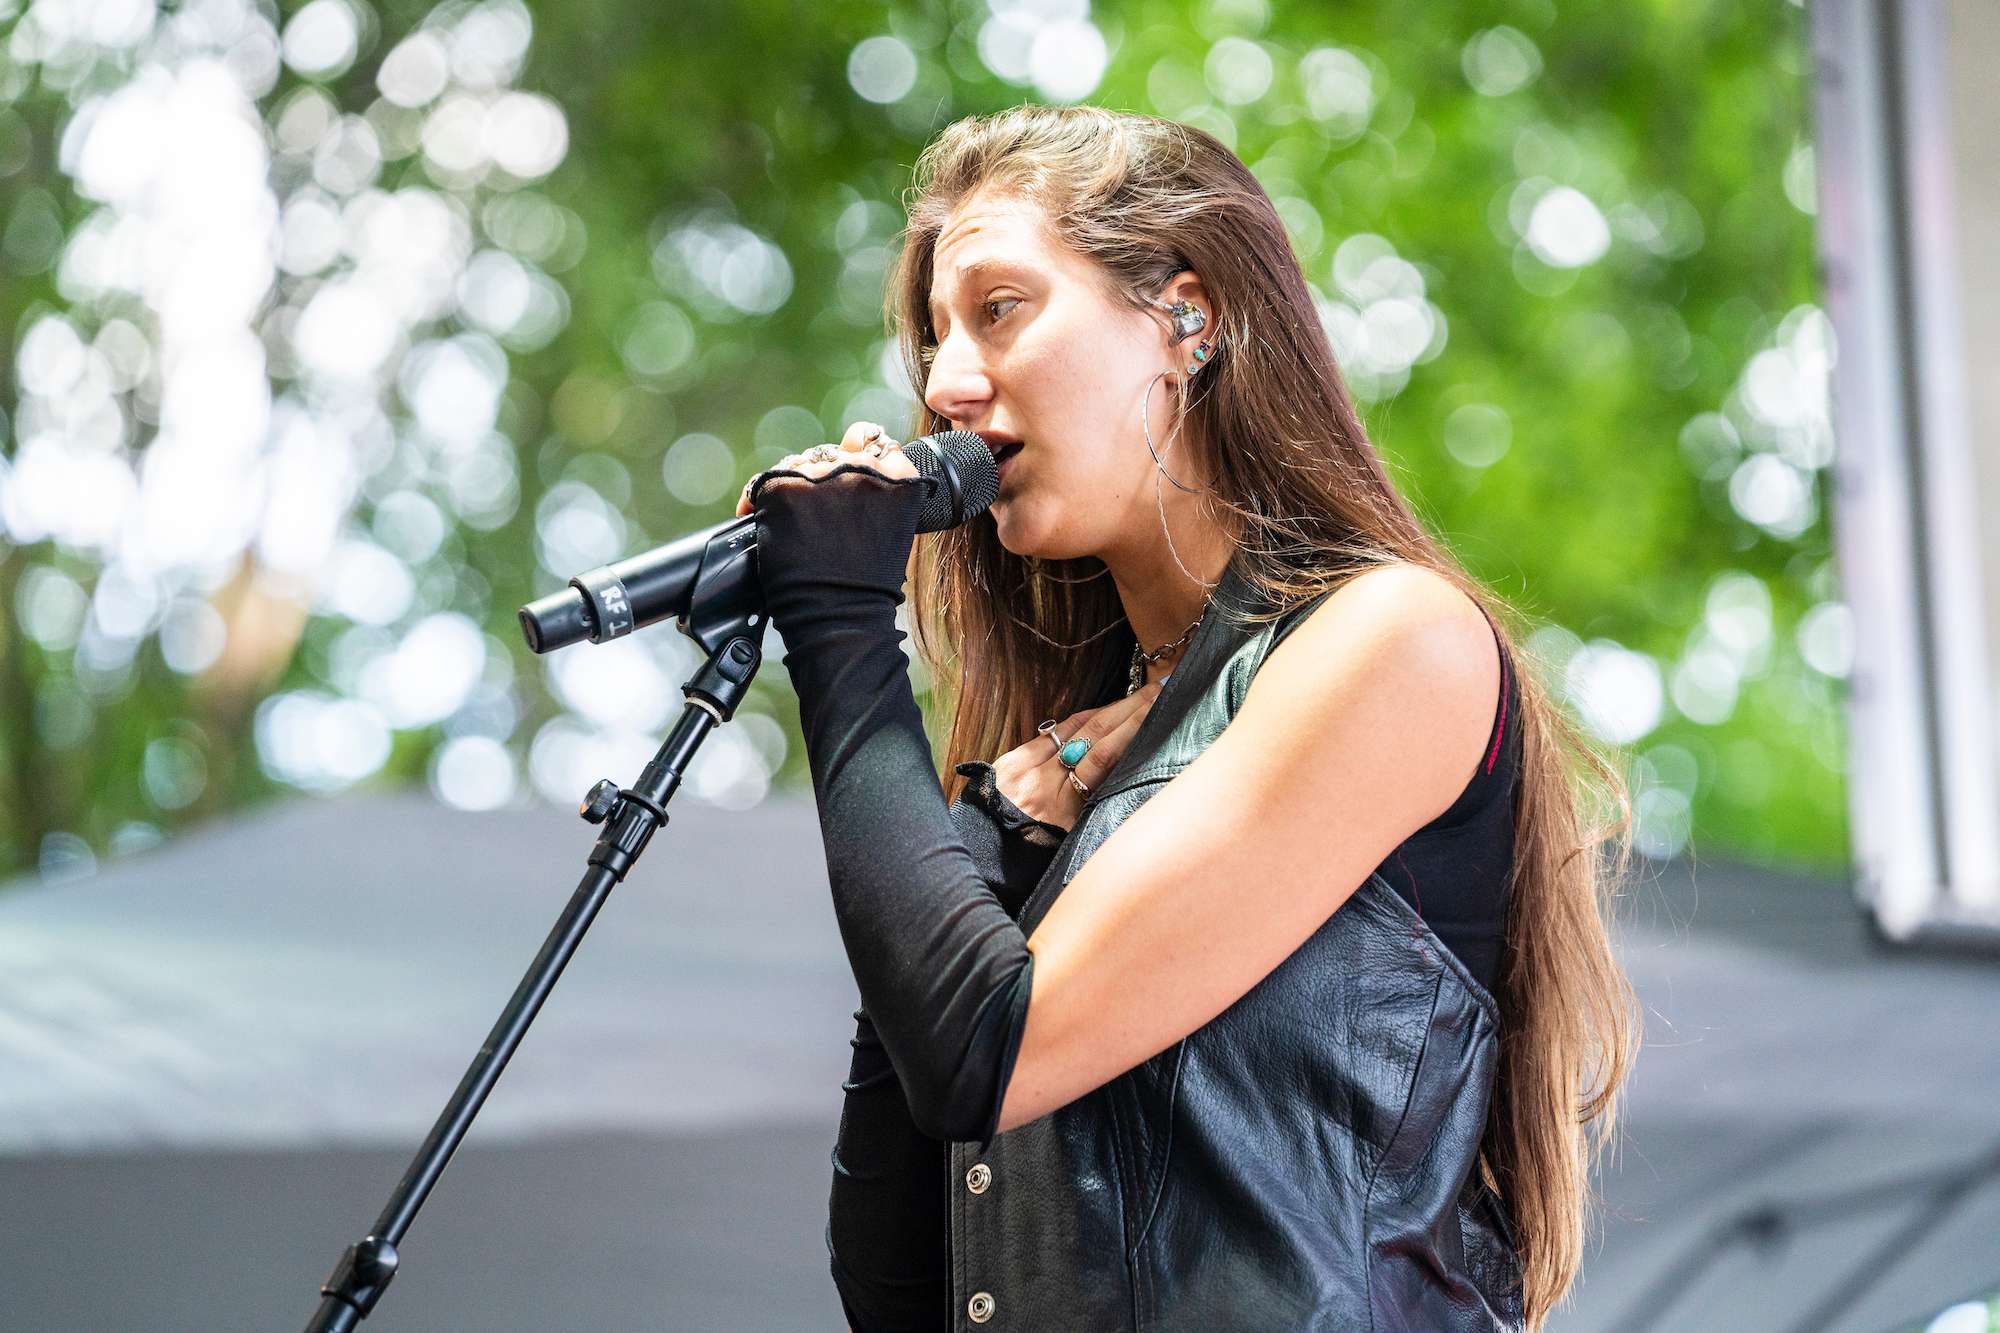 Rosie Live at Lollapalooza [GALLERY] 11